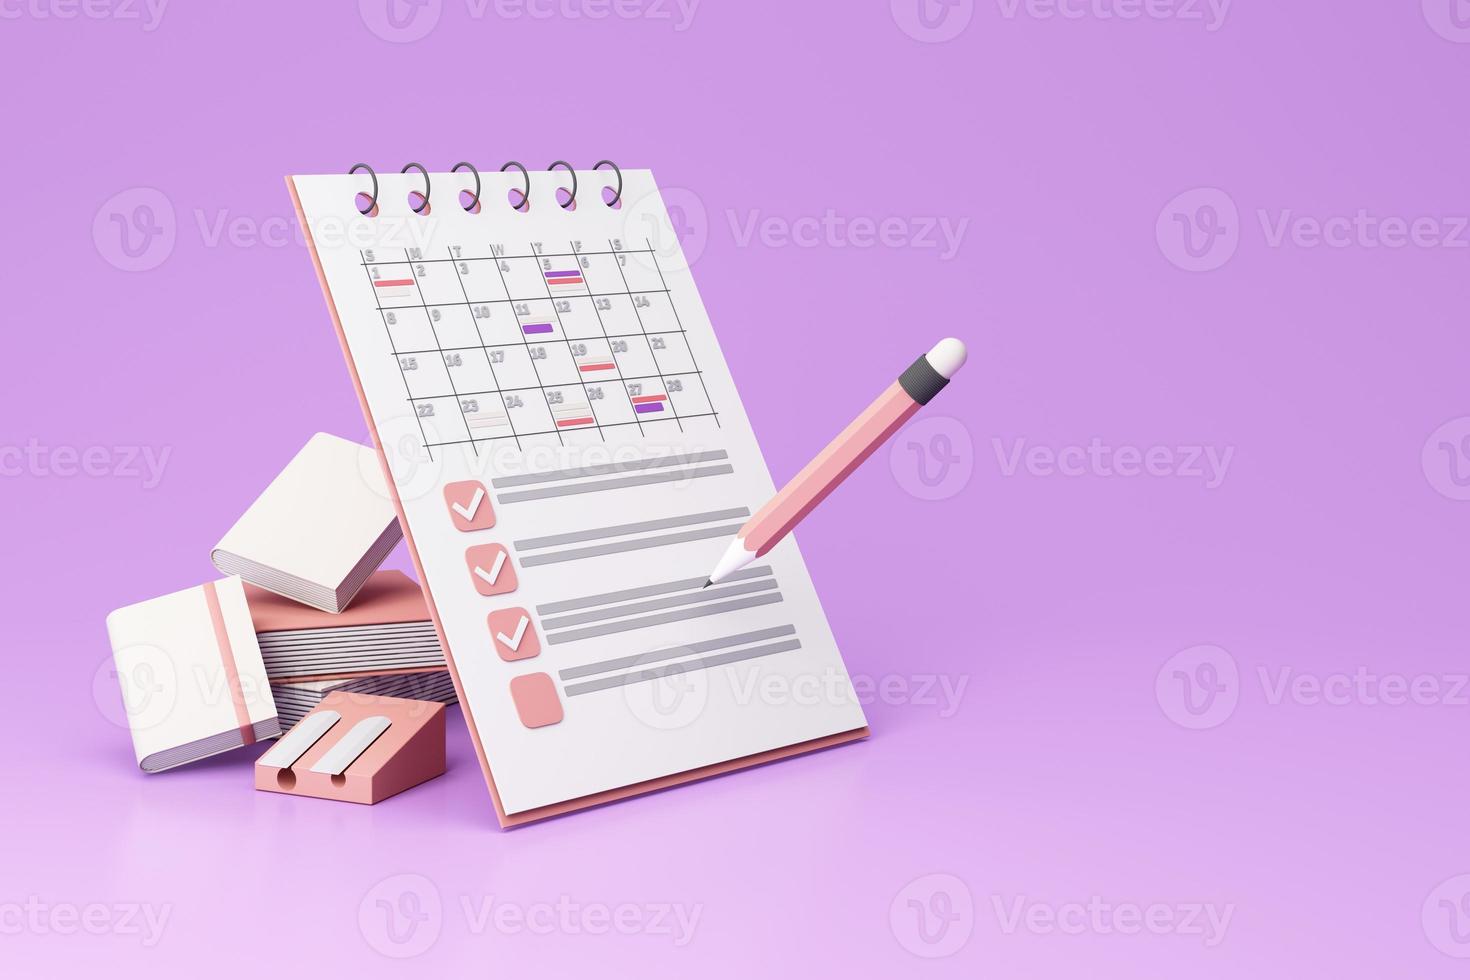 Icon composition with calendar with scheduled dates and appointments, clock, to-do list with tasks, reminders and messages. paper with pencil and book. on purple background realistic 3d render photo